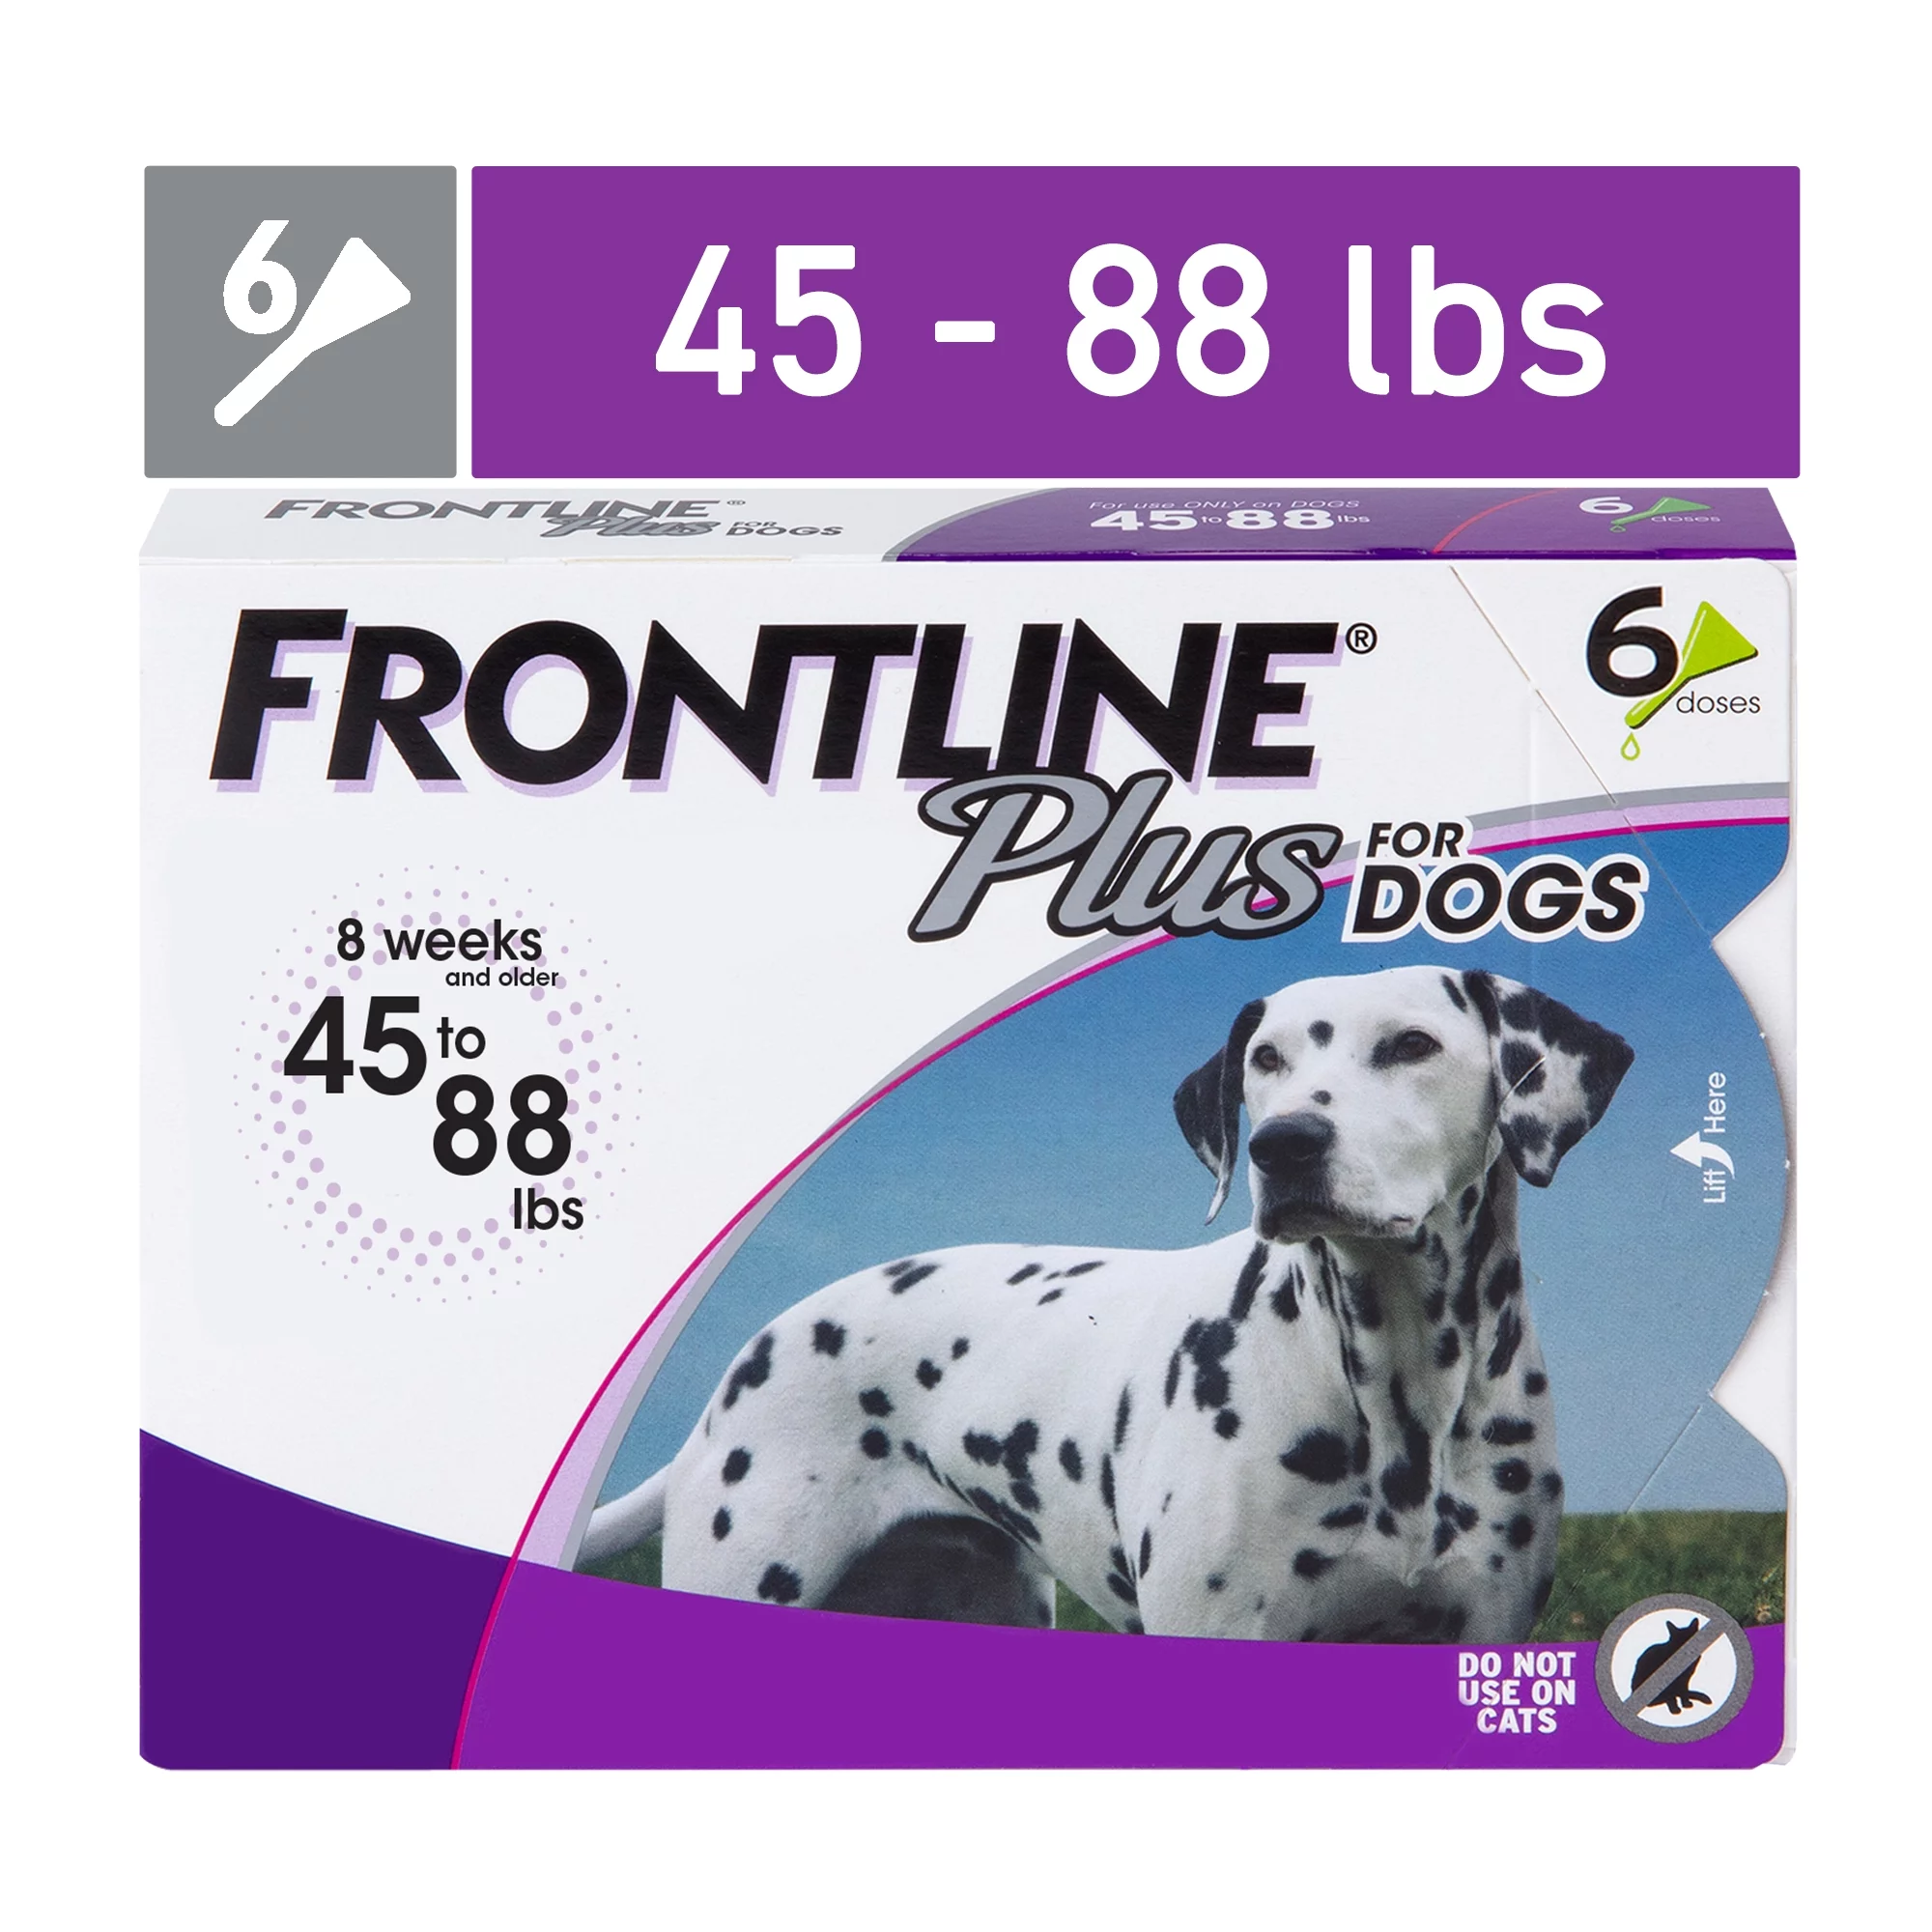 FRONTLINE® Plus for Dogs Flea and Tick Treatment, Large Dog, 45-88 lb, Purple Box, 6 CT